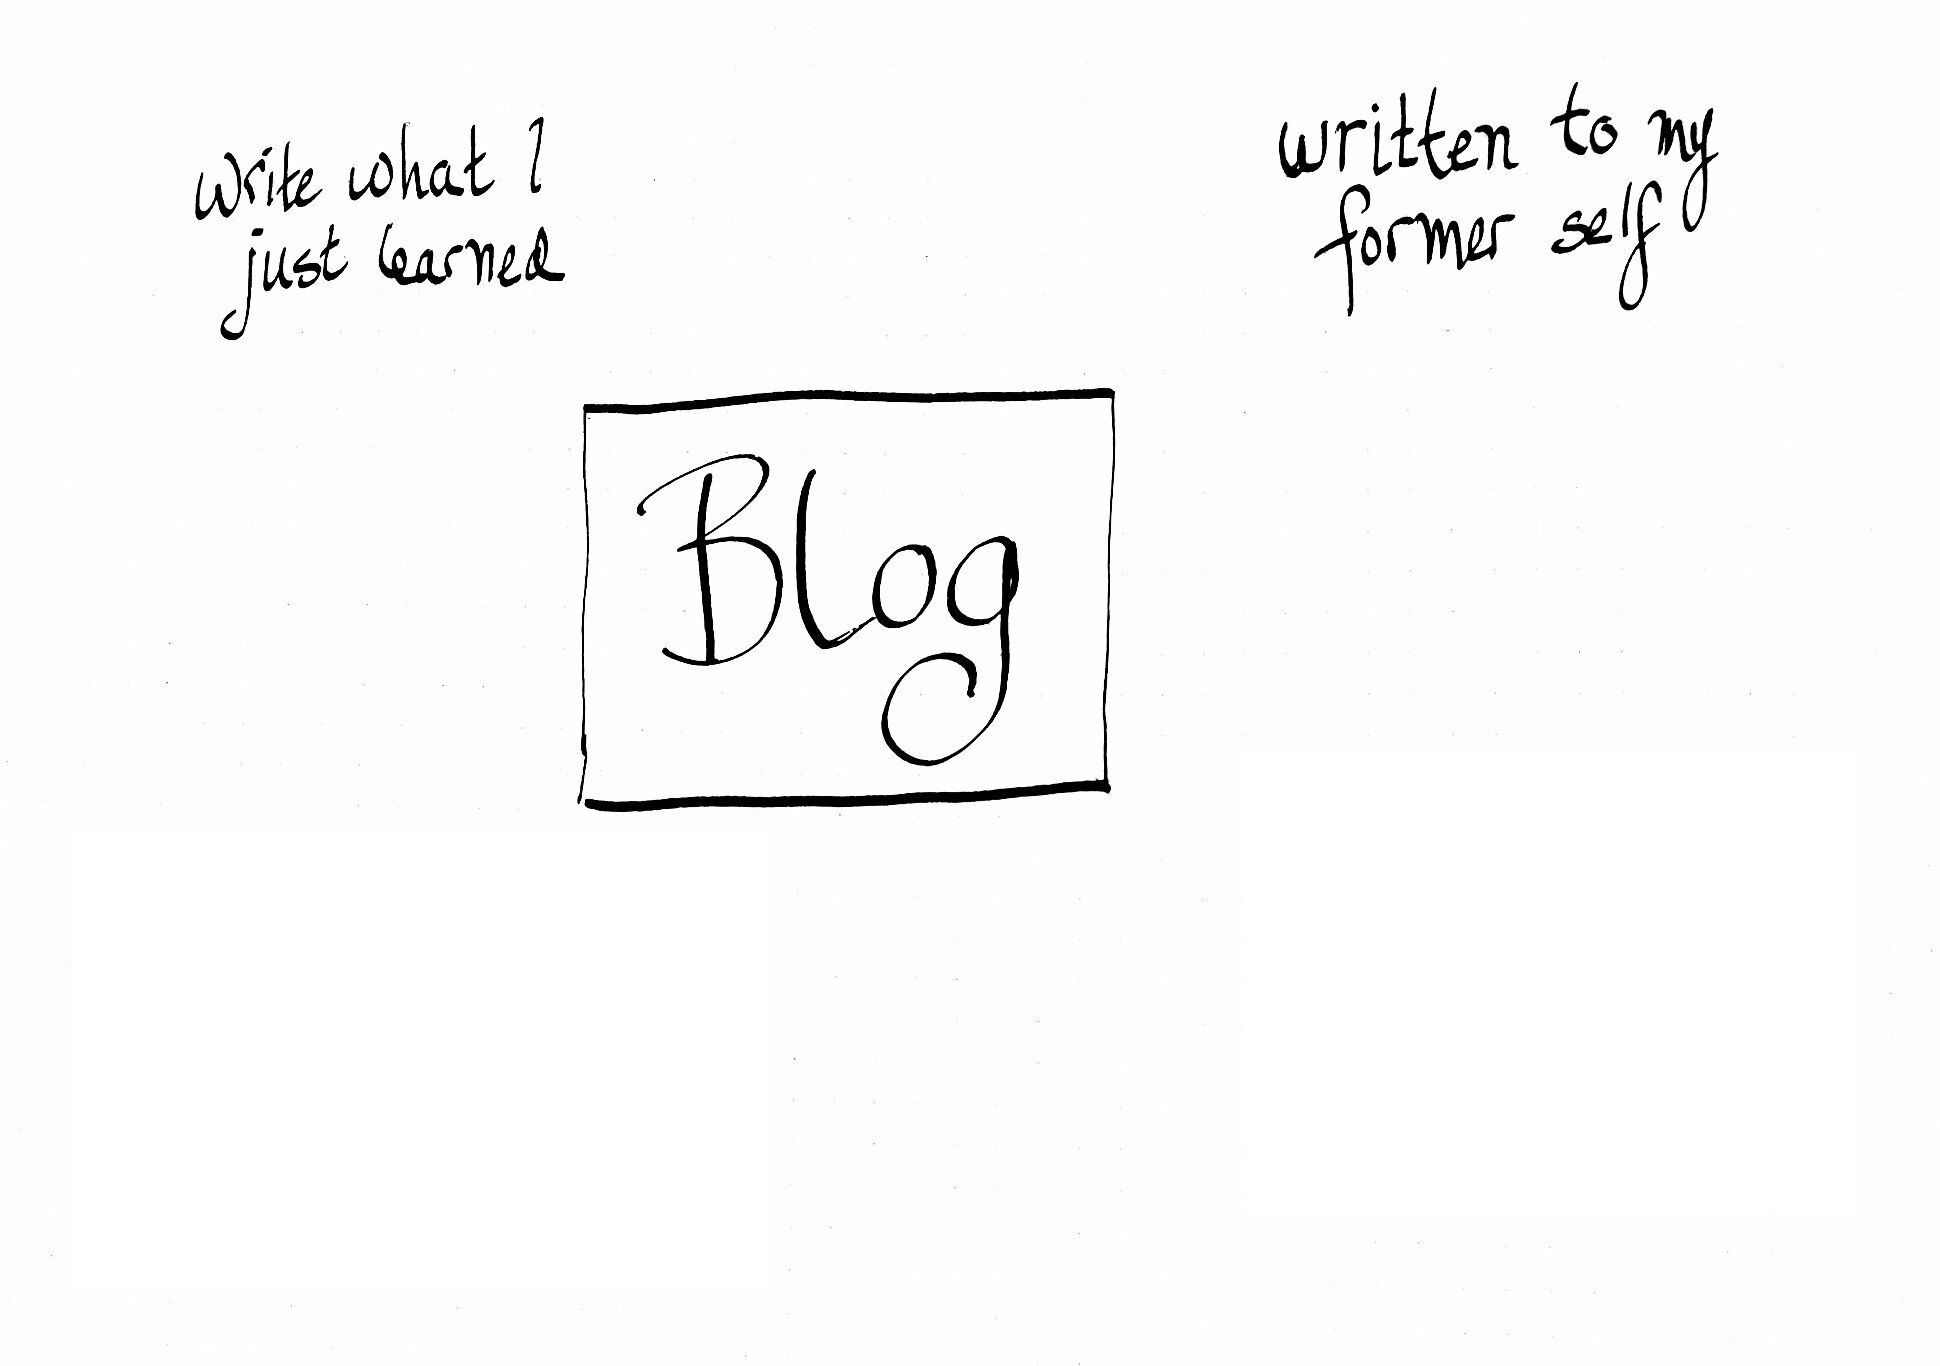 04-32-blog-to-former-self.md